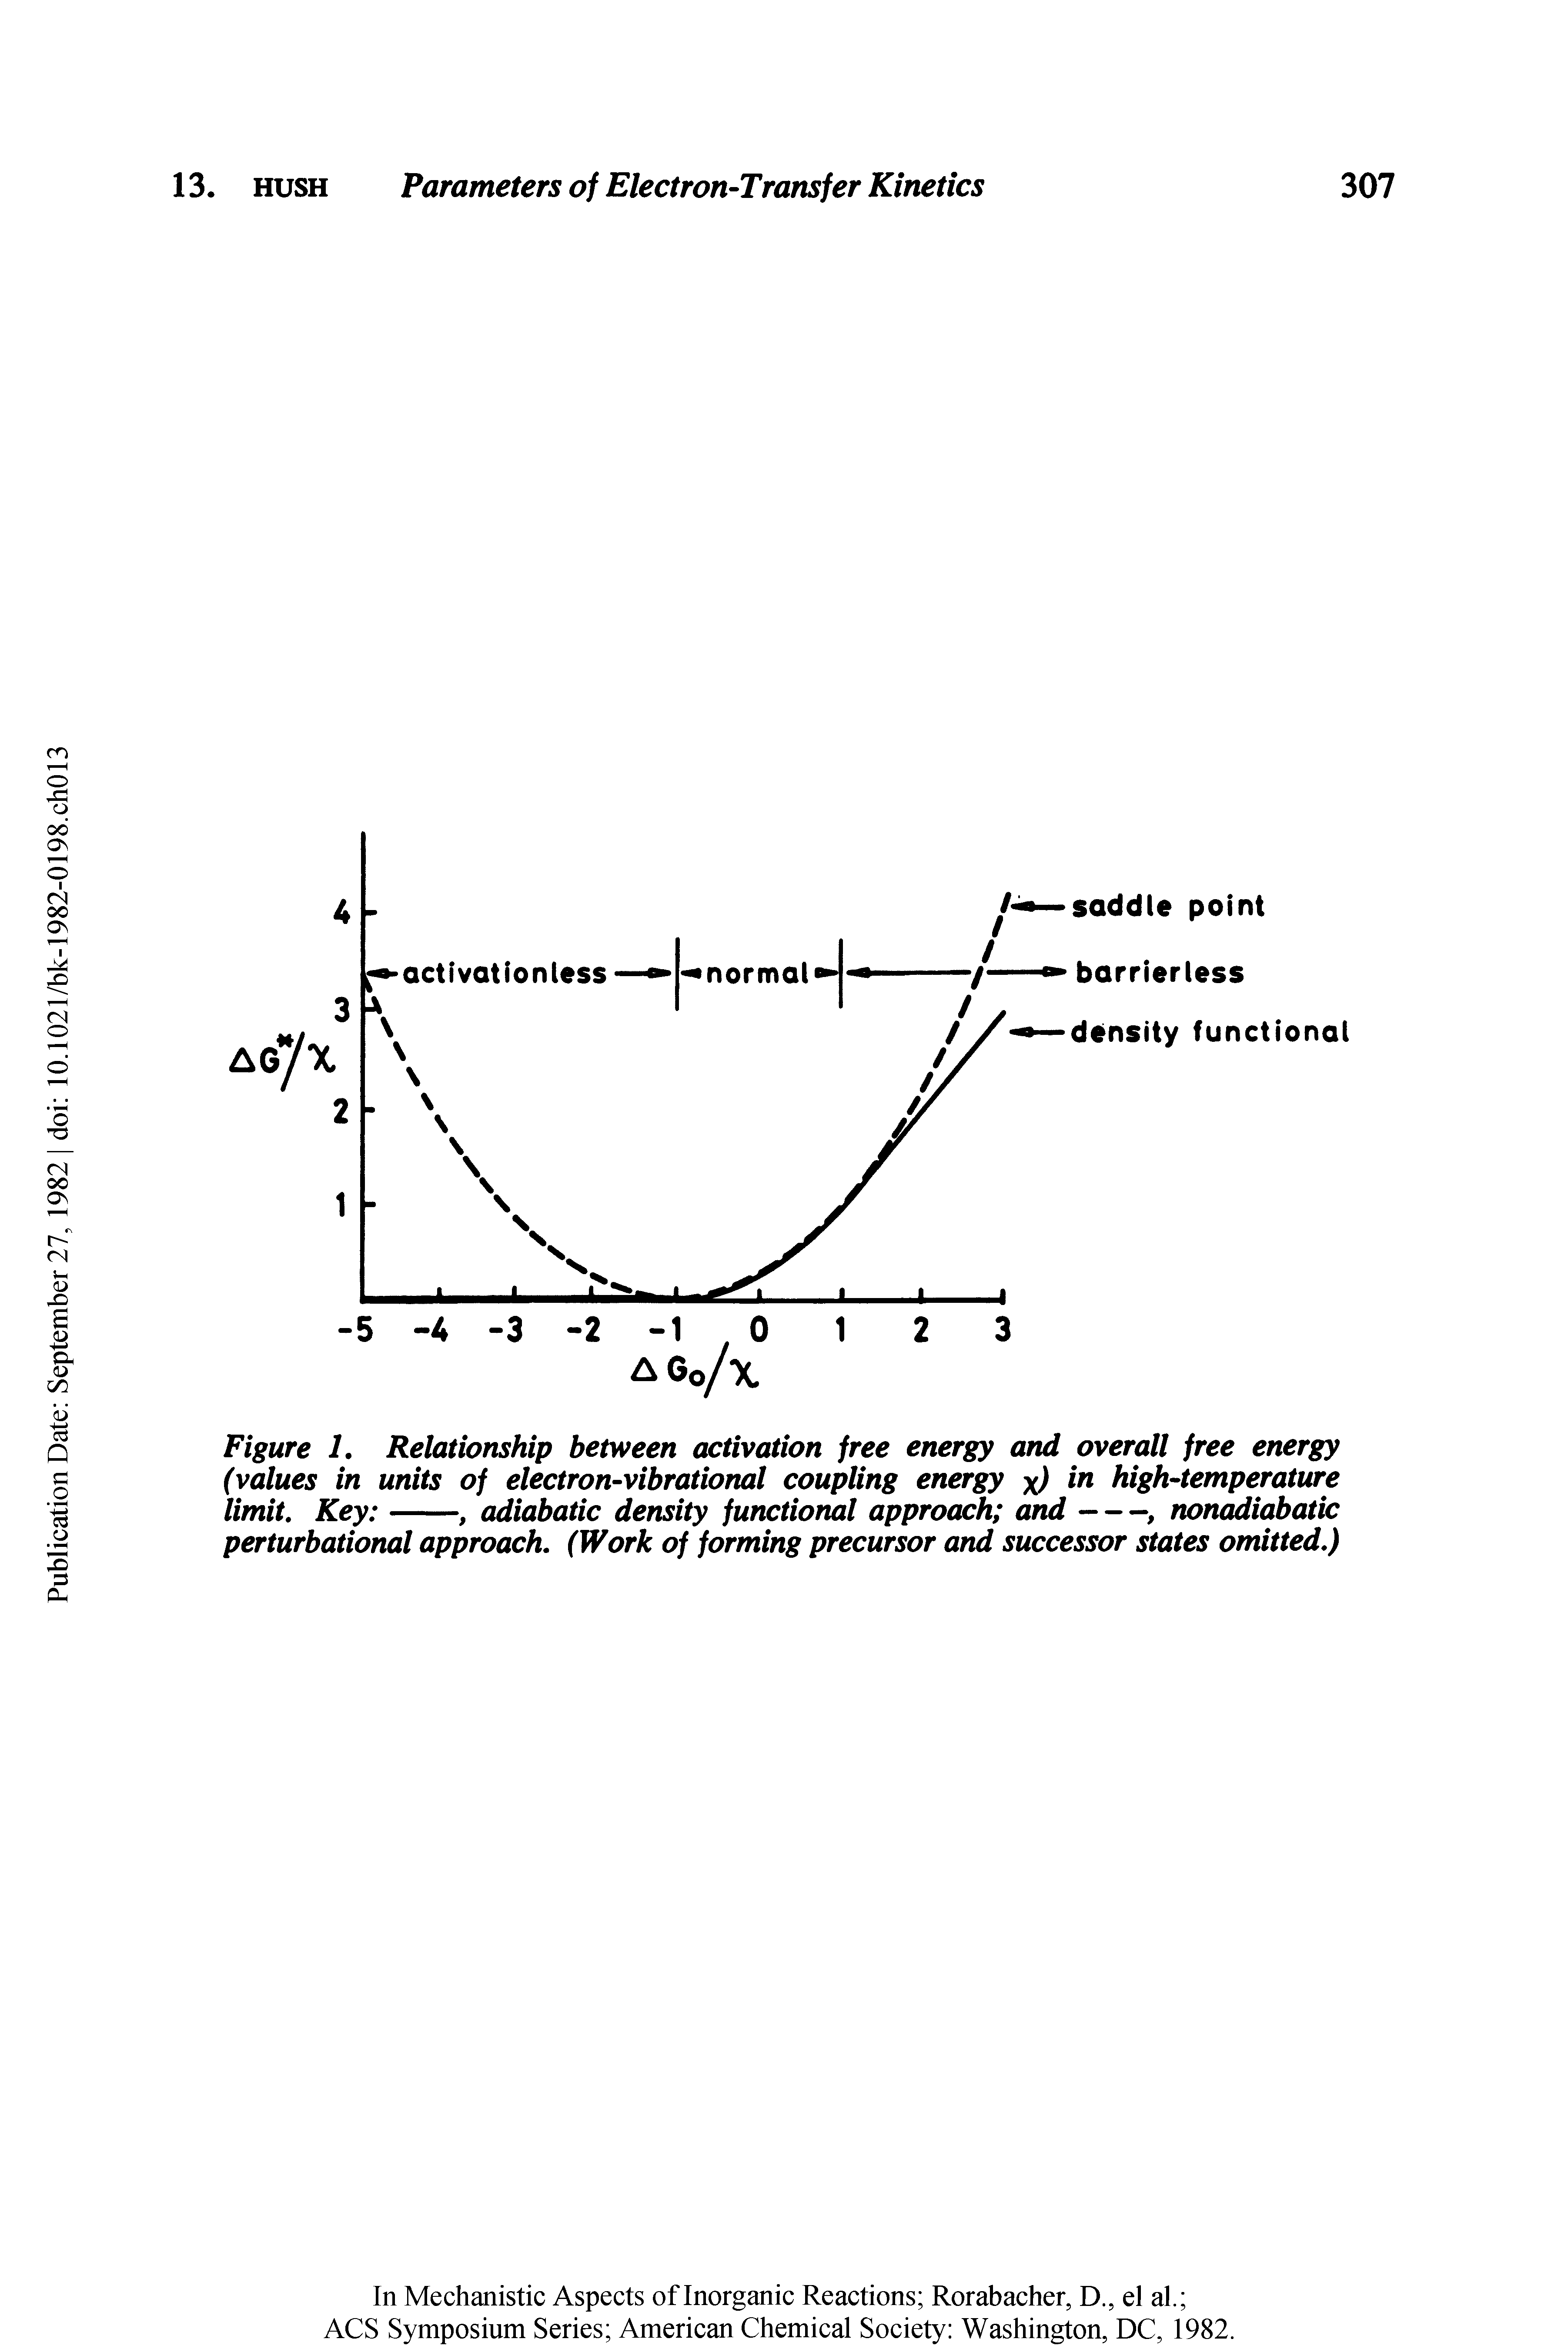 Figure 1. Relationship between activation free energy and overall free energy (values in units of electron-vibrational coupling energy x) n high-temperature...